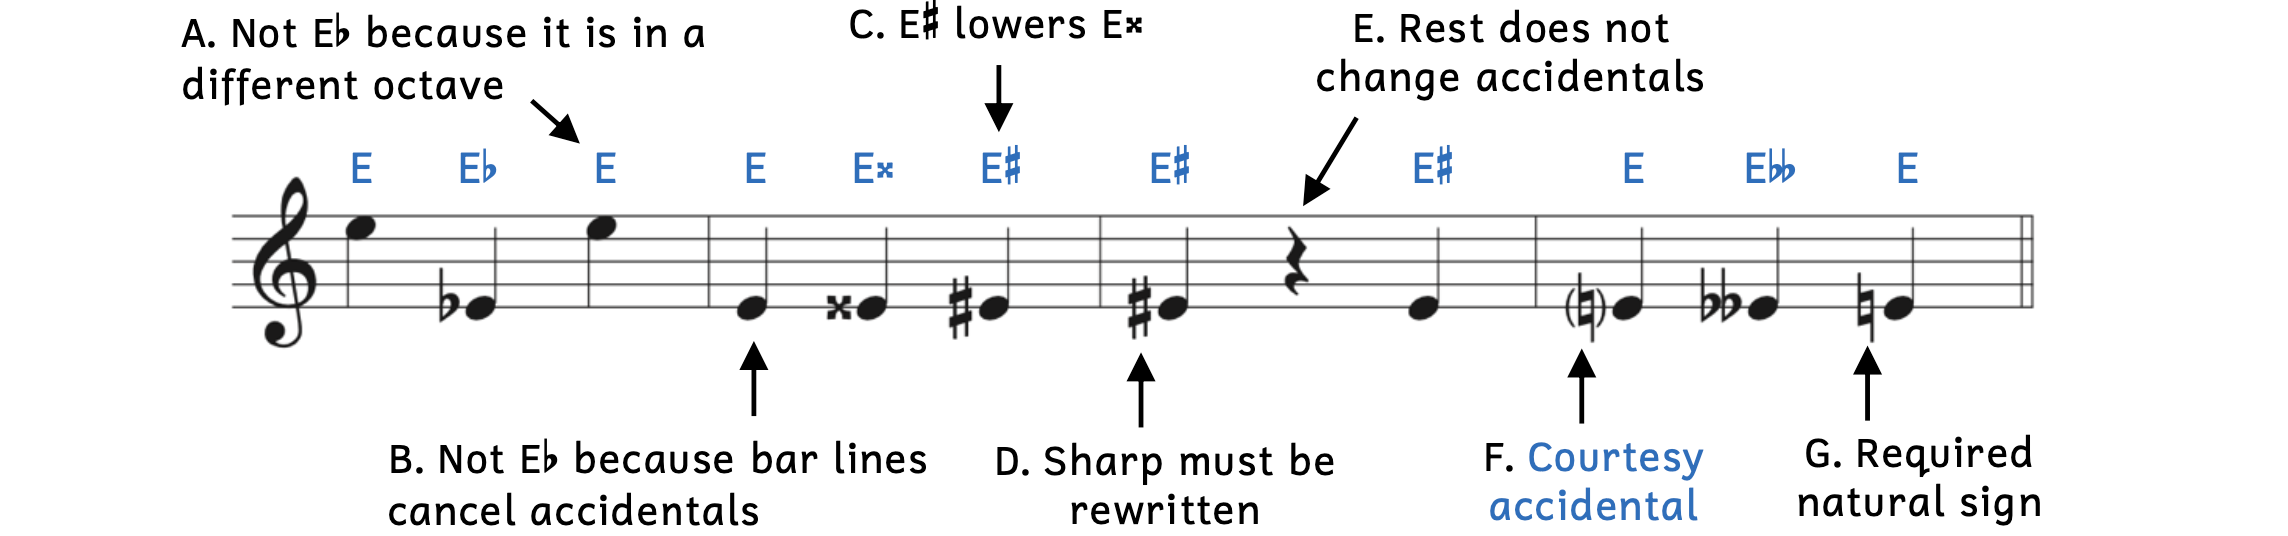 Examples of how accidentals work. The first pitch is E5 without any accidental. The second pitch is E-flat4 with a flat. The third pitch is E5, not E-flat5. Example A explains this is because the E is in a different octave. There is a bar line. In the second measure, the first pitch is E4, not E-flat4. Example B explains this is because bar lines cancel previous accidentals. The next pitch is E-double-sharp4 with a double sharp. The third pitch is E-sharp4 with a sharp. Example C explains that the sharp actually lowers the previous E-double-sharp4. There is a bar line. The next pitch is E-sharp4. Example D explains that the sharp must be rewritten because of the bar line. Then there is a quarter rest. The next pitch is also E-sharp4 but there is no accidental. Example E explains that the rest does not change accidentals. There is a bar line. The first pitch is E4 and has a natural sign within parentheses. Example F explains that this is a courtesy accidental. The next pitch is E-double-flat4 with a double flat. The last pitch is E4 with a natural sign. Example G explains that this natural sign is required.